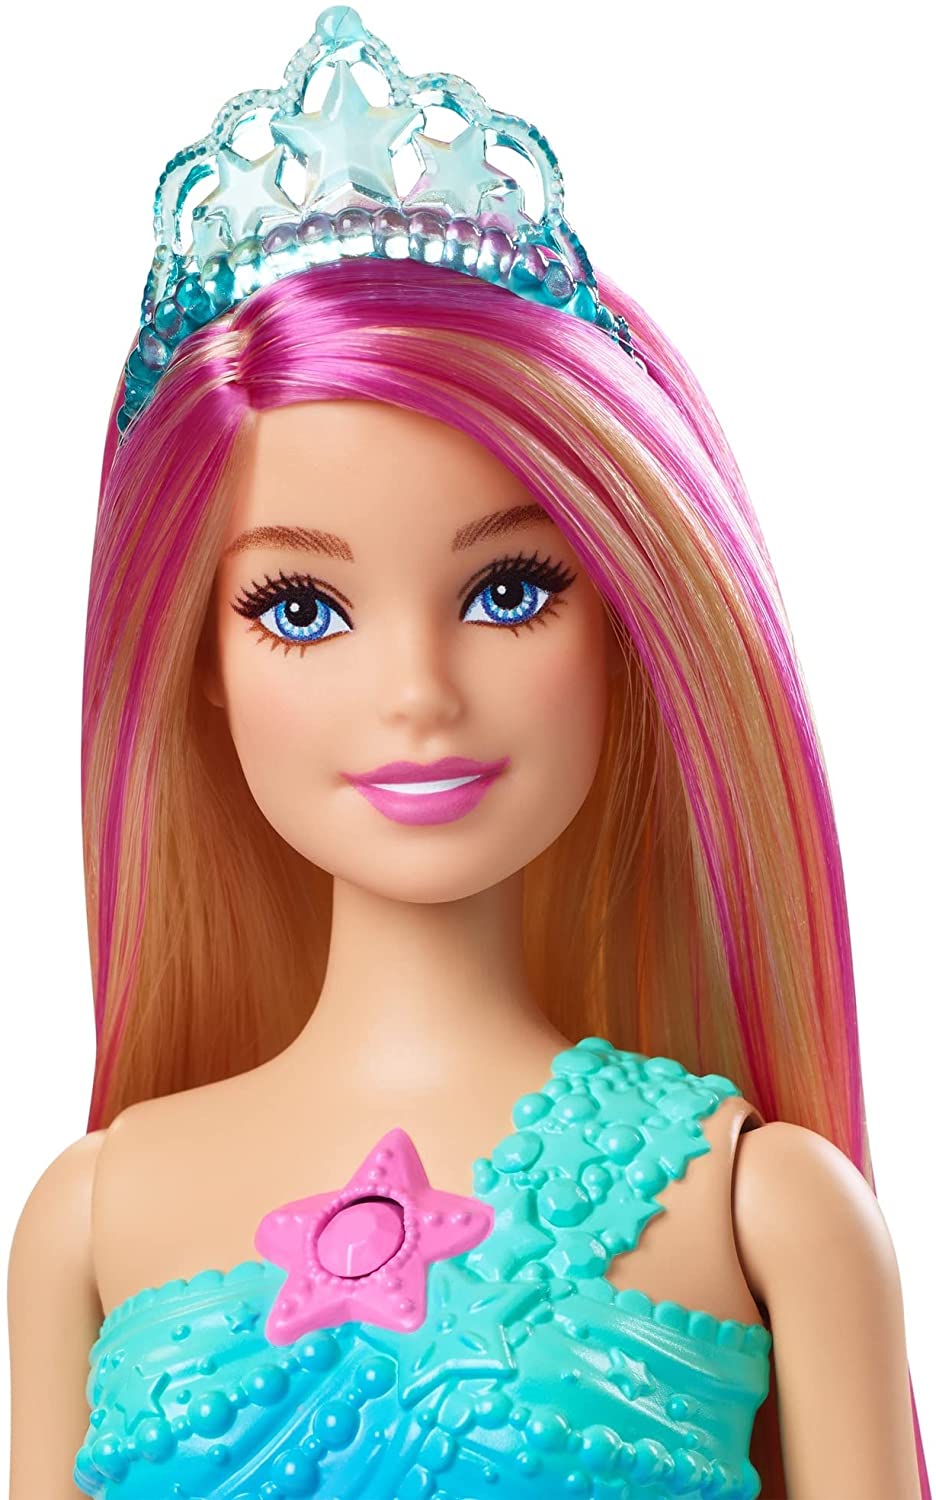 Barbie Dreamtopia Twinkle Lights Mermaid Doll (12 in, Blonde) with Water-Activated Light-Up Feature and Pink-Streaked Hair